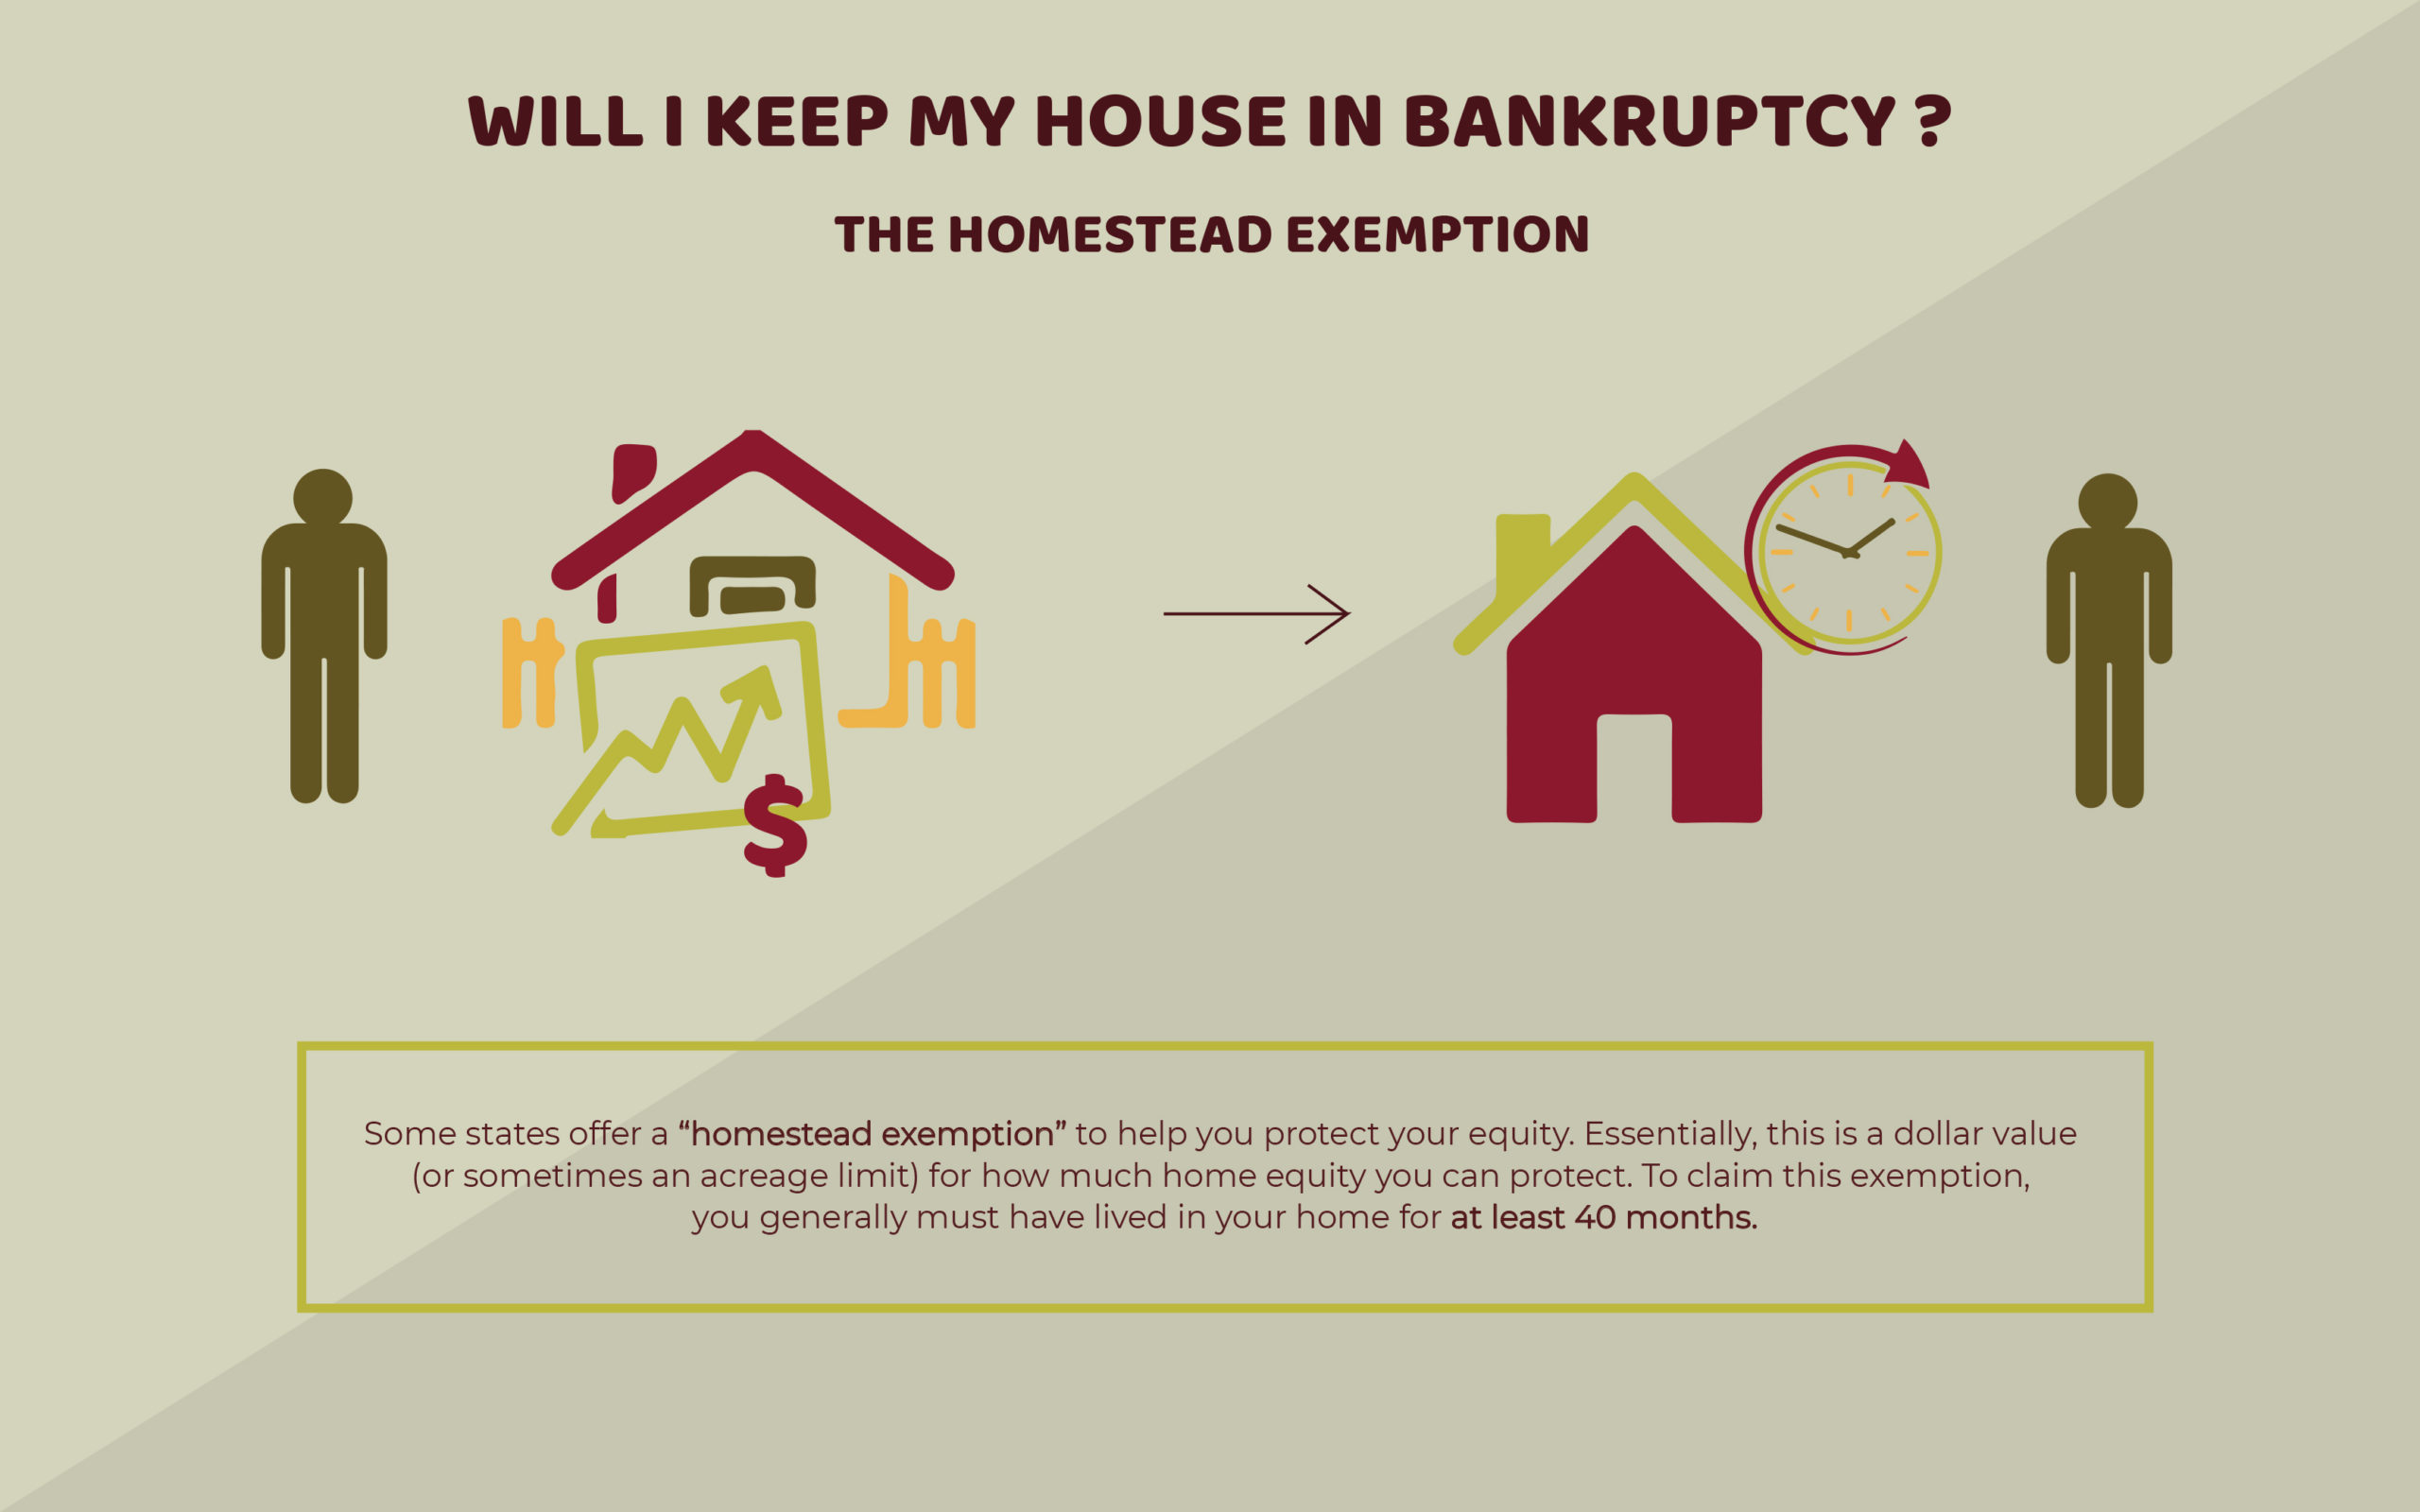 Will I Keep My House in Bankruptcy?